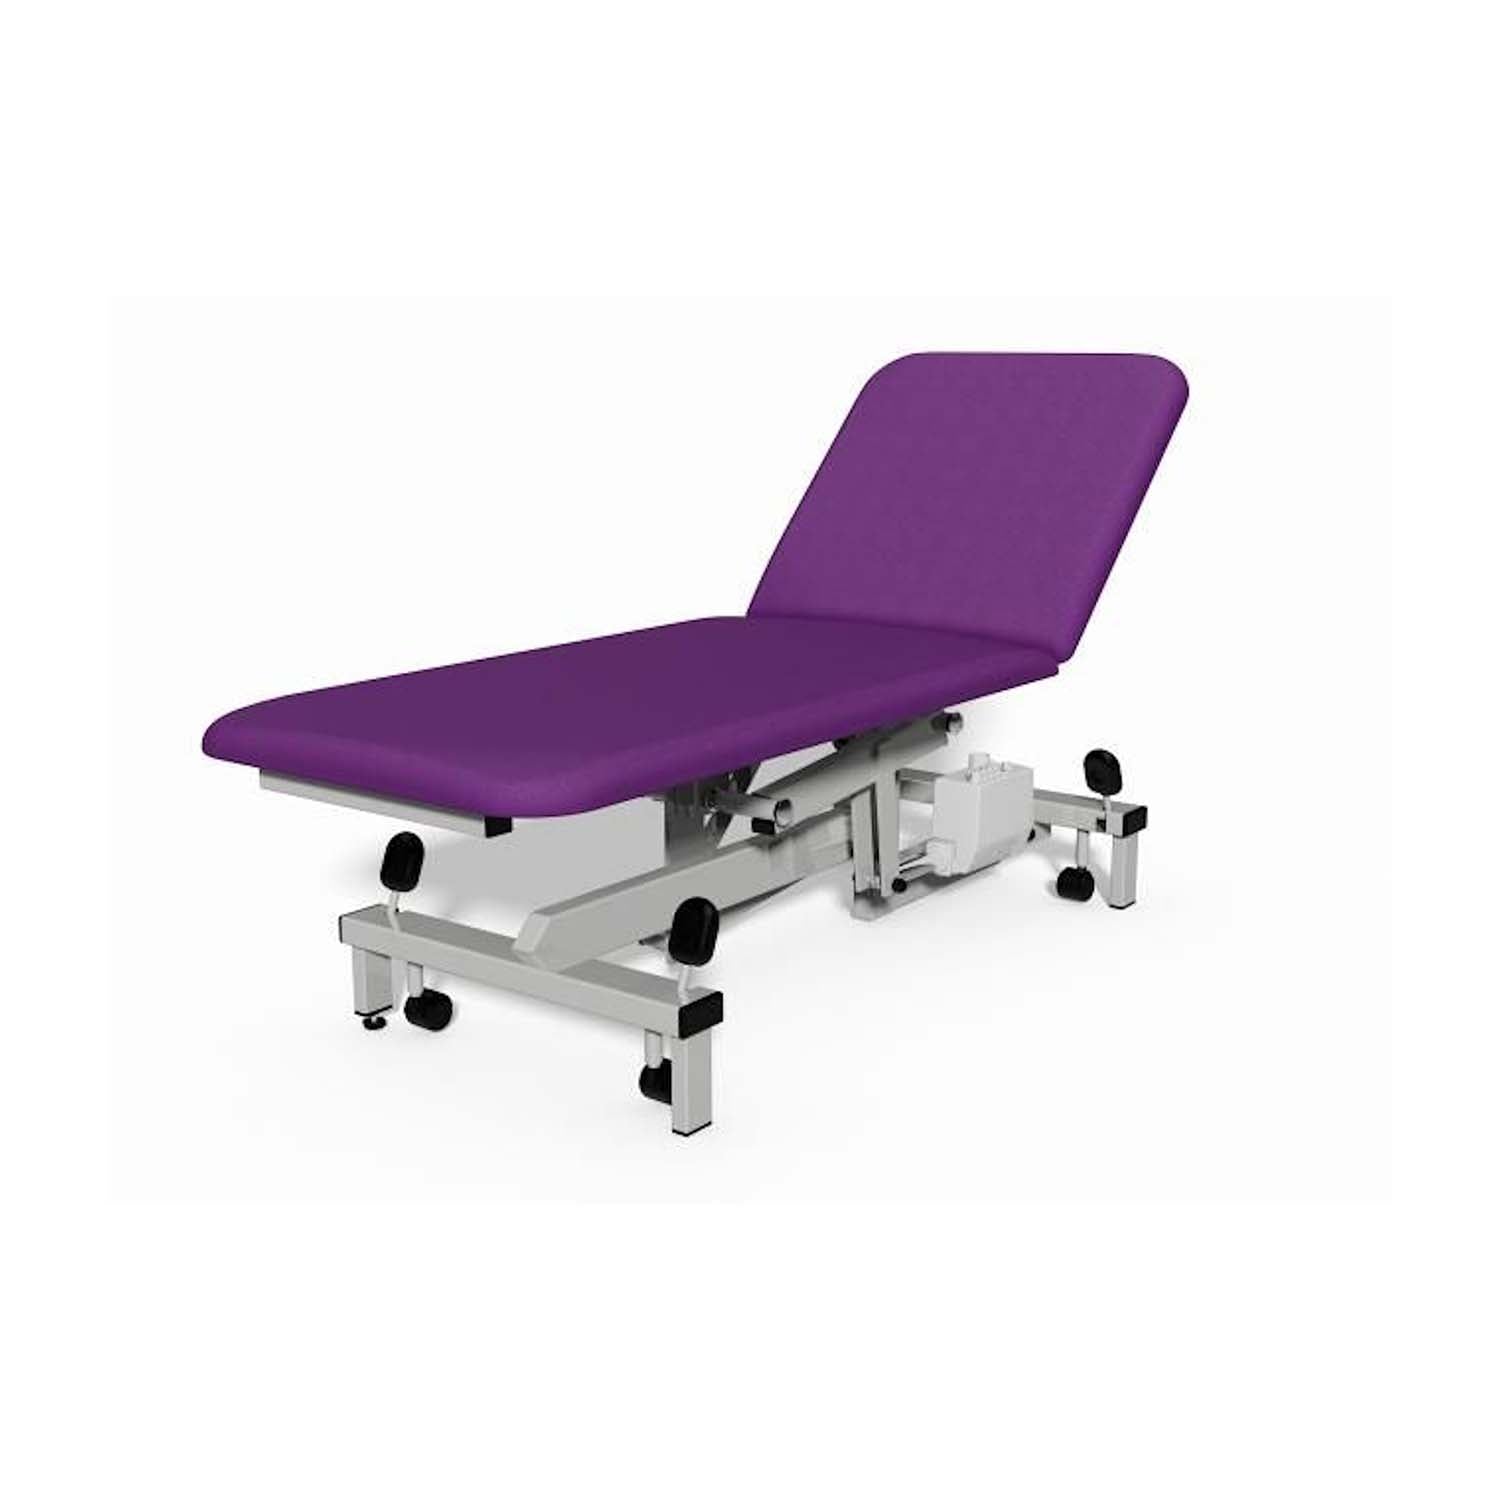 Plinth 2000 Model 502 Examination Couch | Electric | Grape